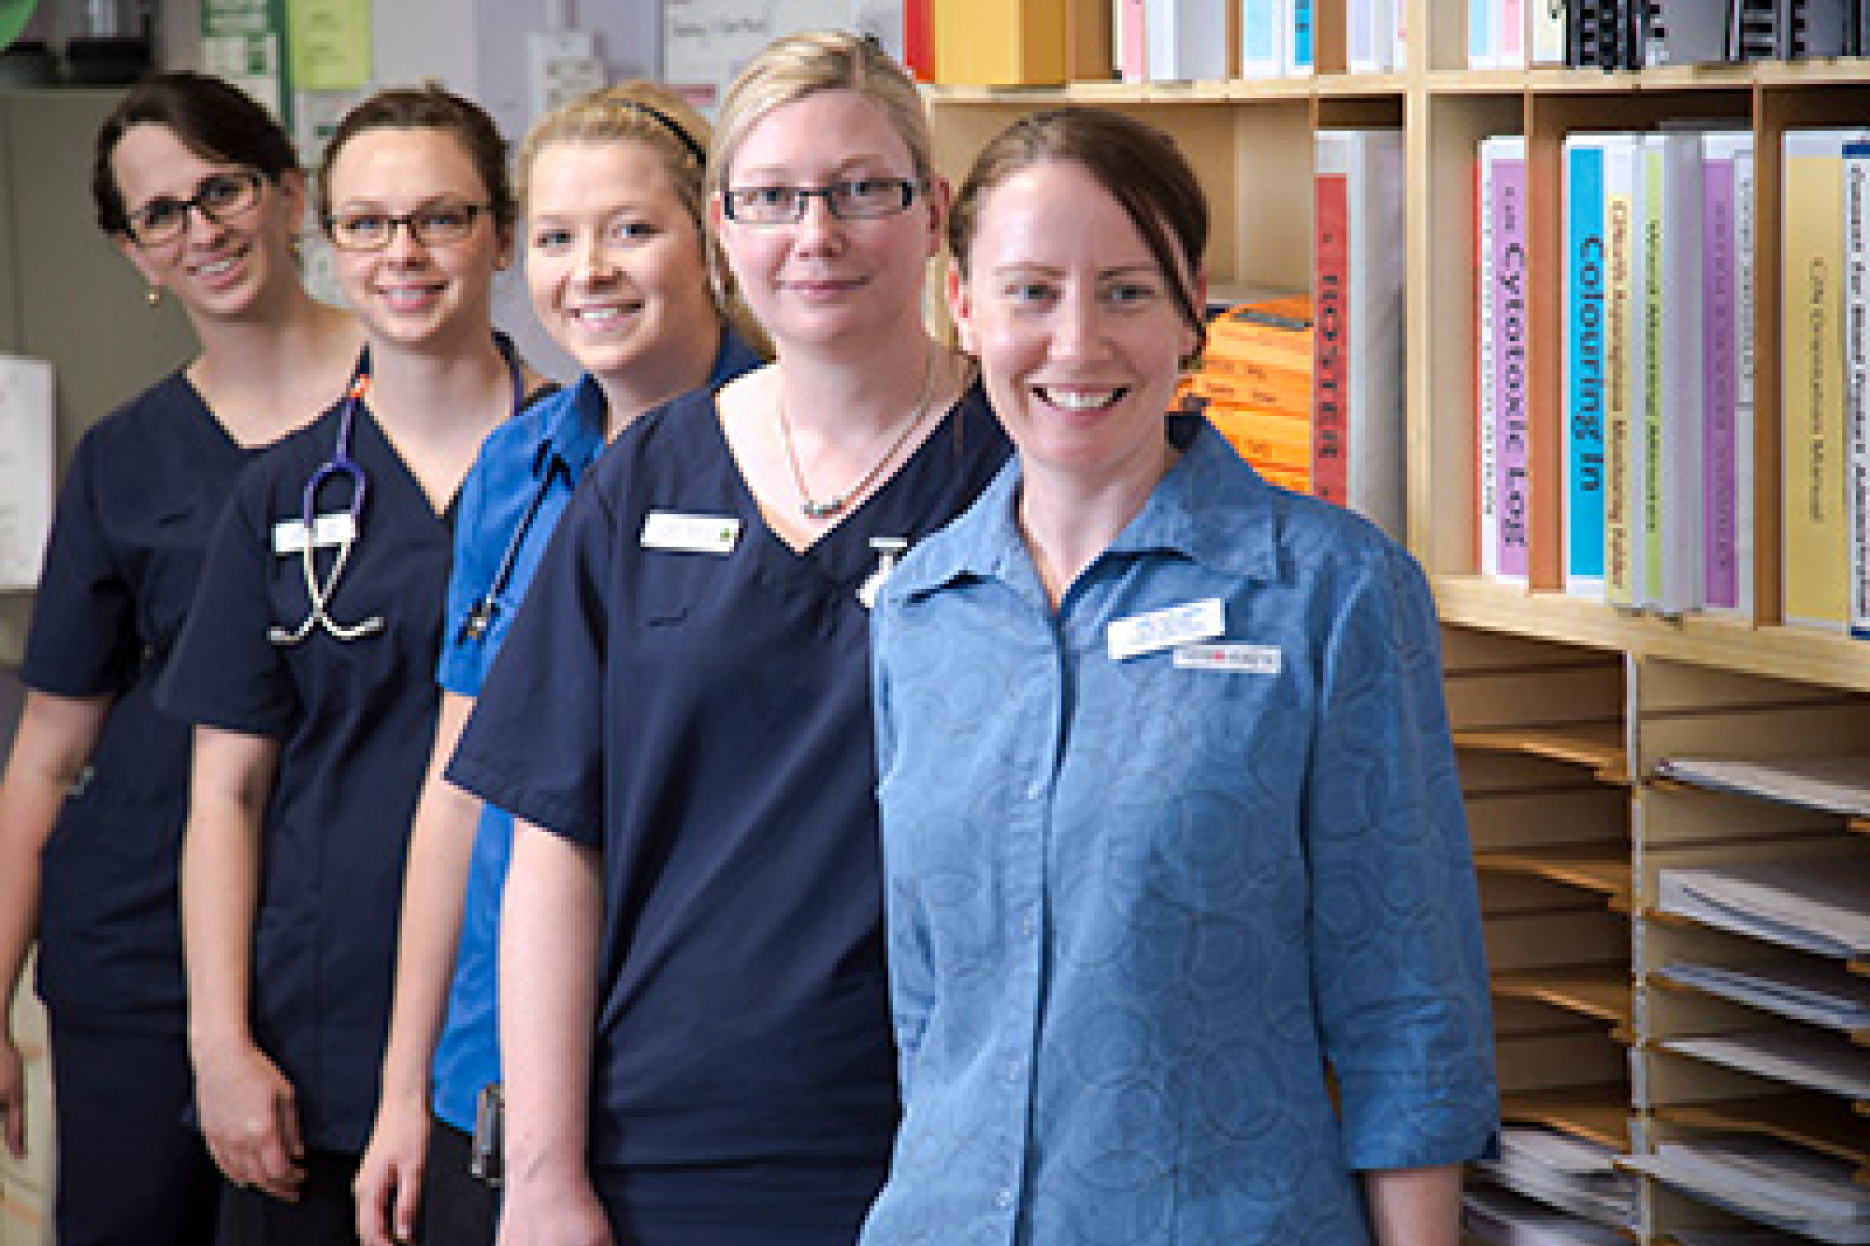 Group of smiling female clinicians